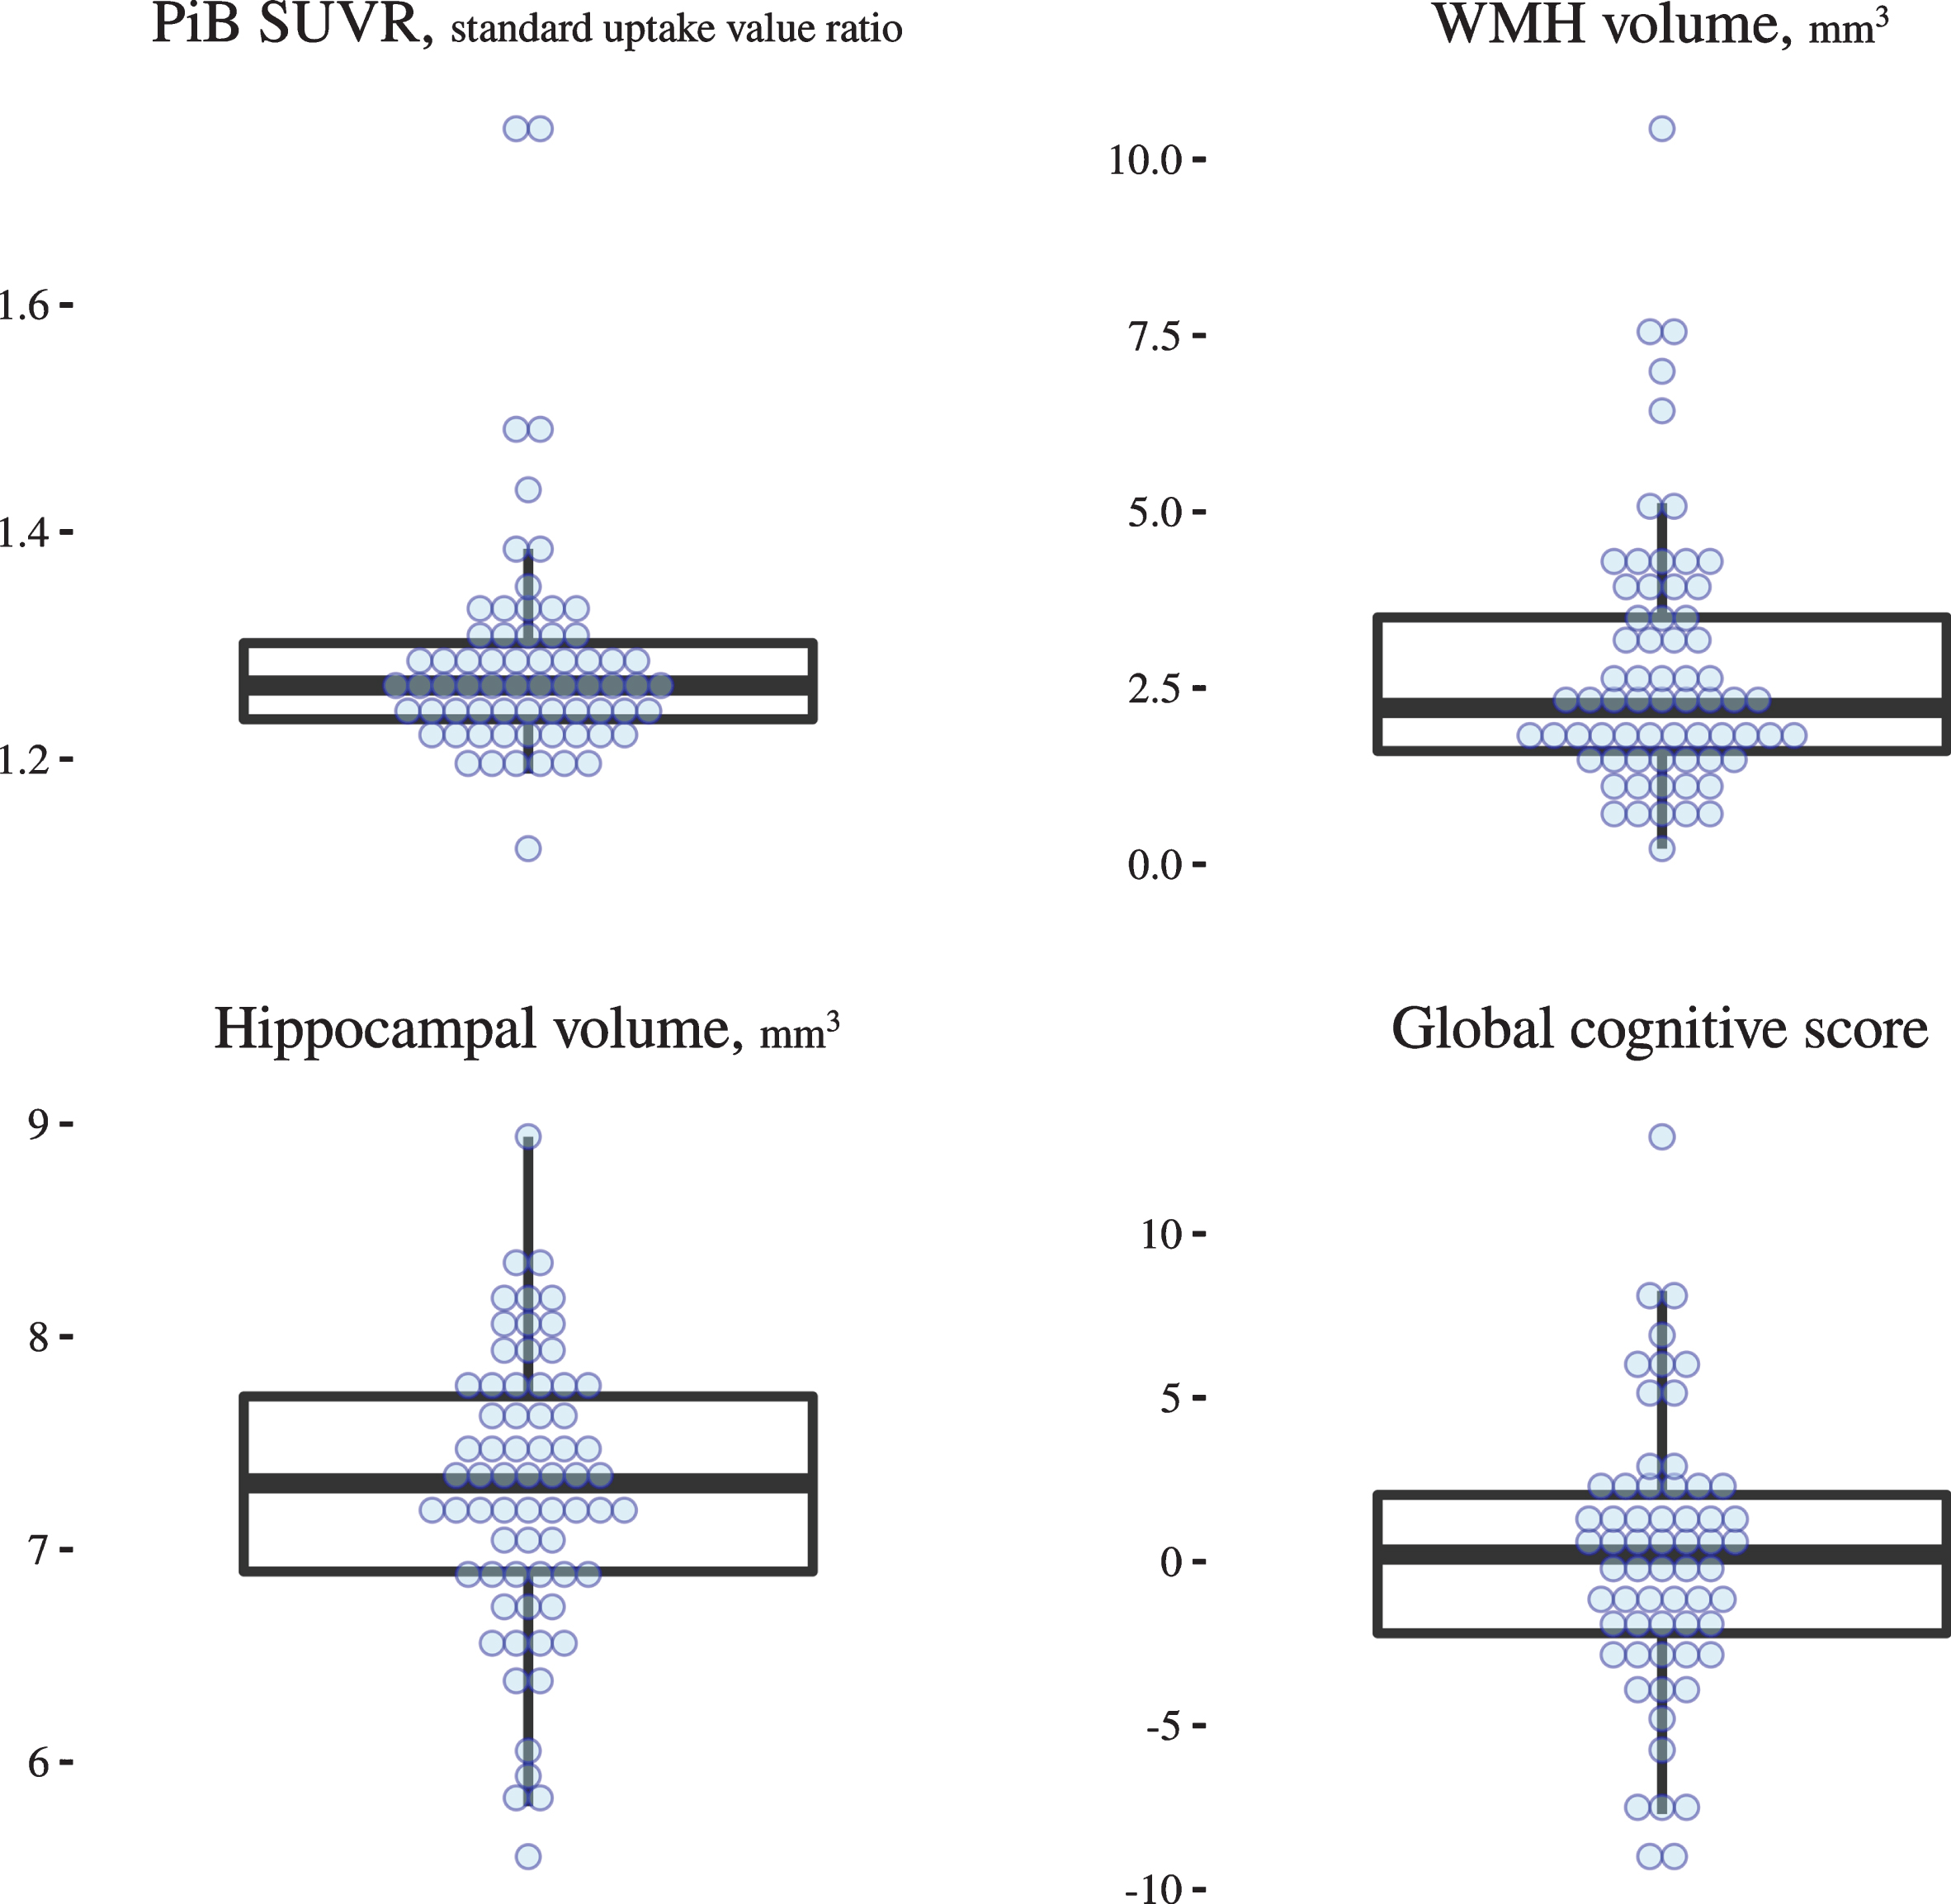 Data distribution of amyloid-β load, white matter hyperintensity, hippocampal volume, and global cognitive score.